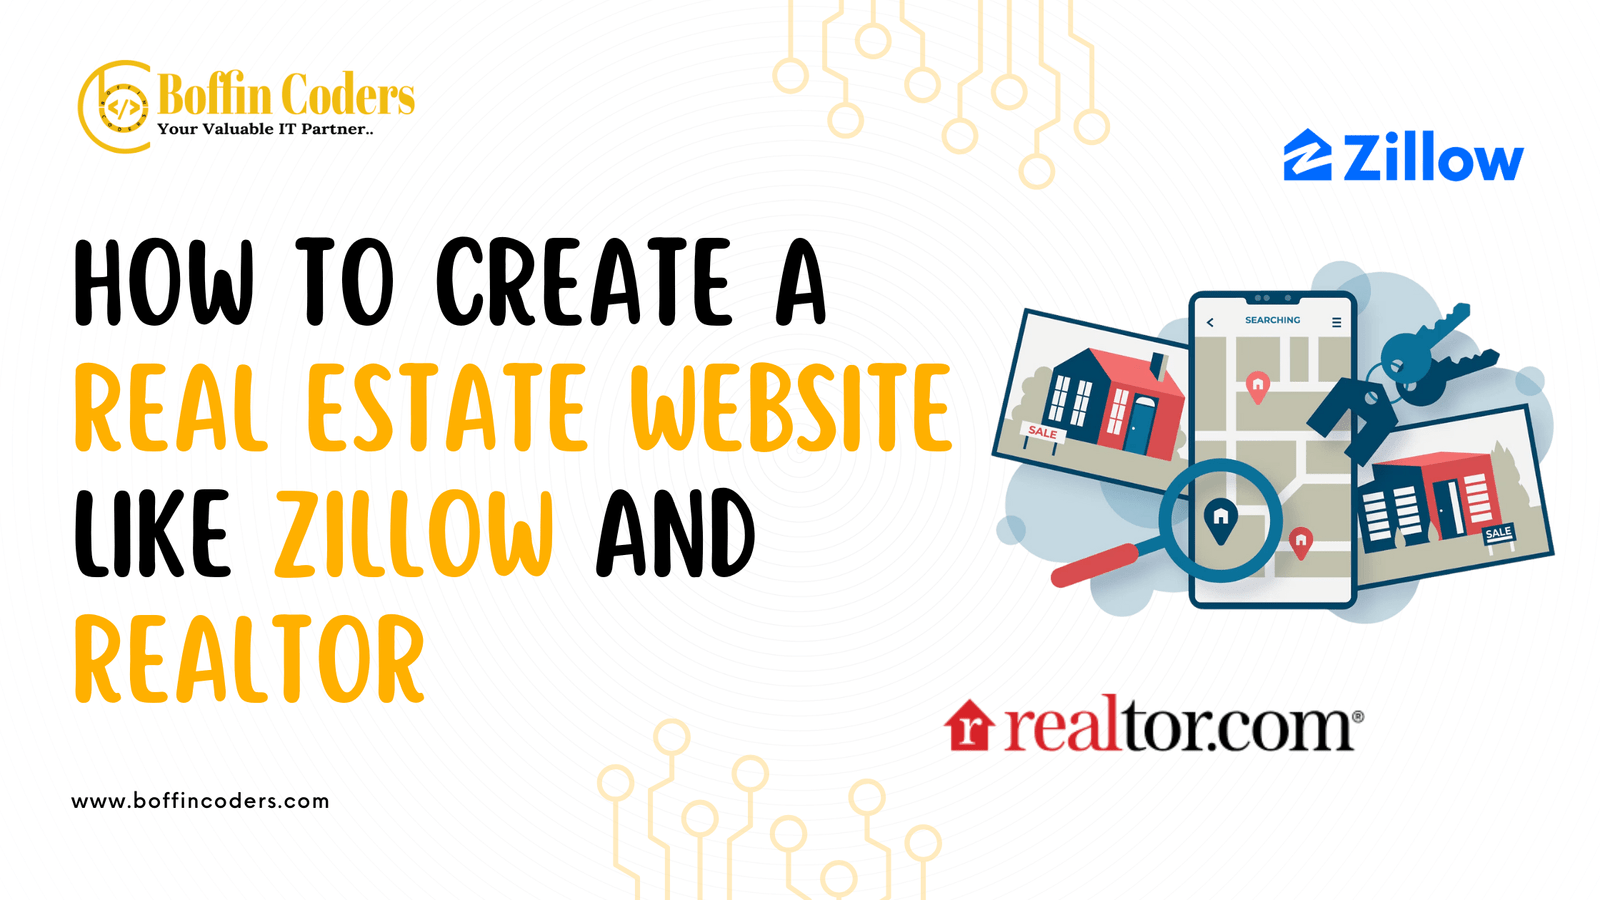 How to Create a Real Estate Website Like Zillow and Realtor